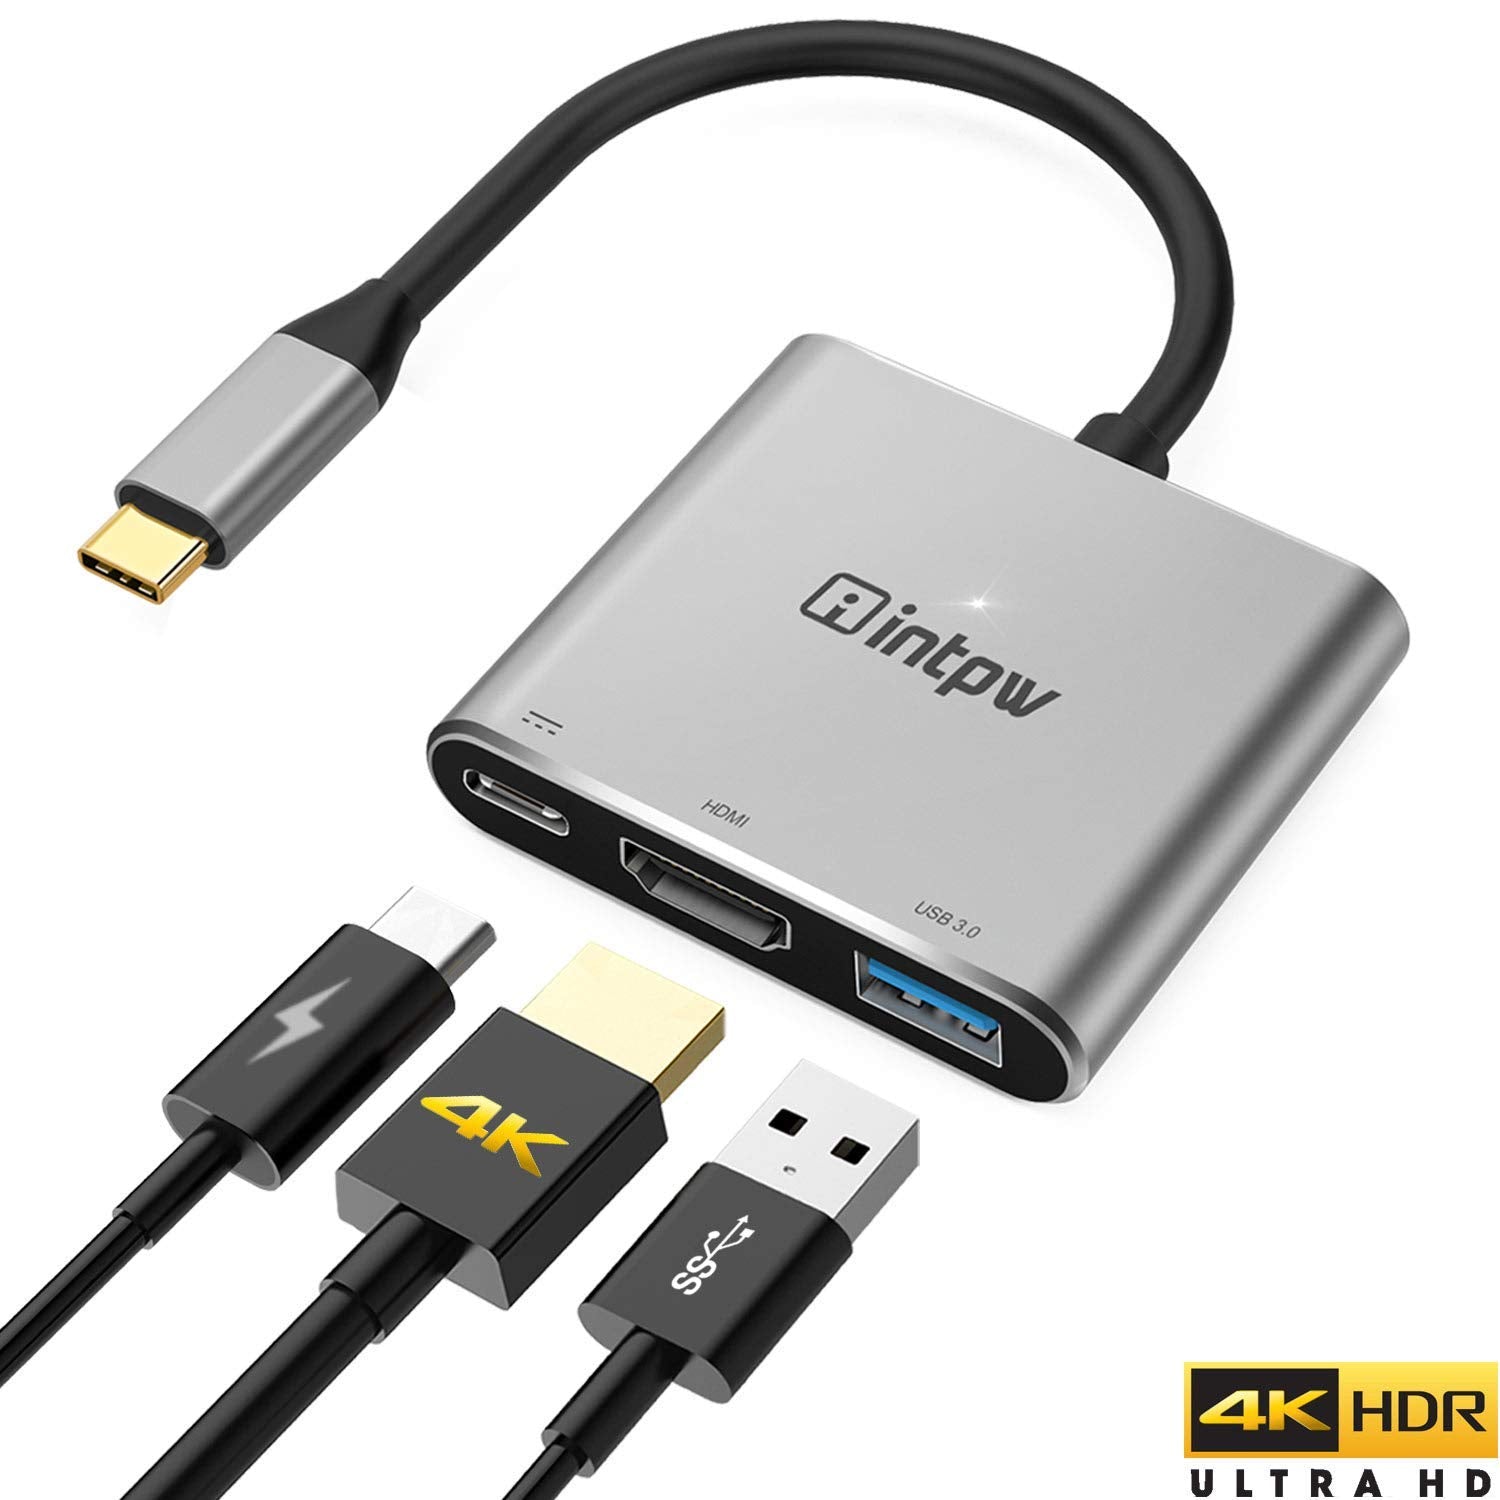 Best 4K USB-C HDMI Switch with USB 3.0 for Gaming & Work